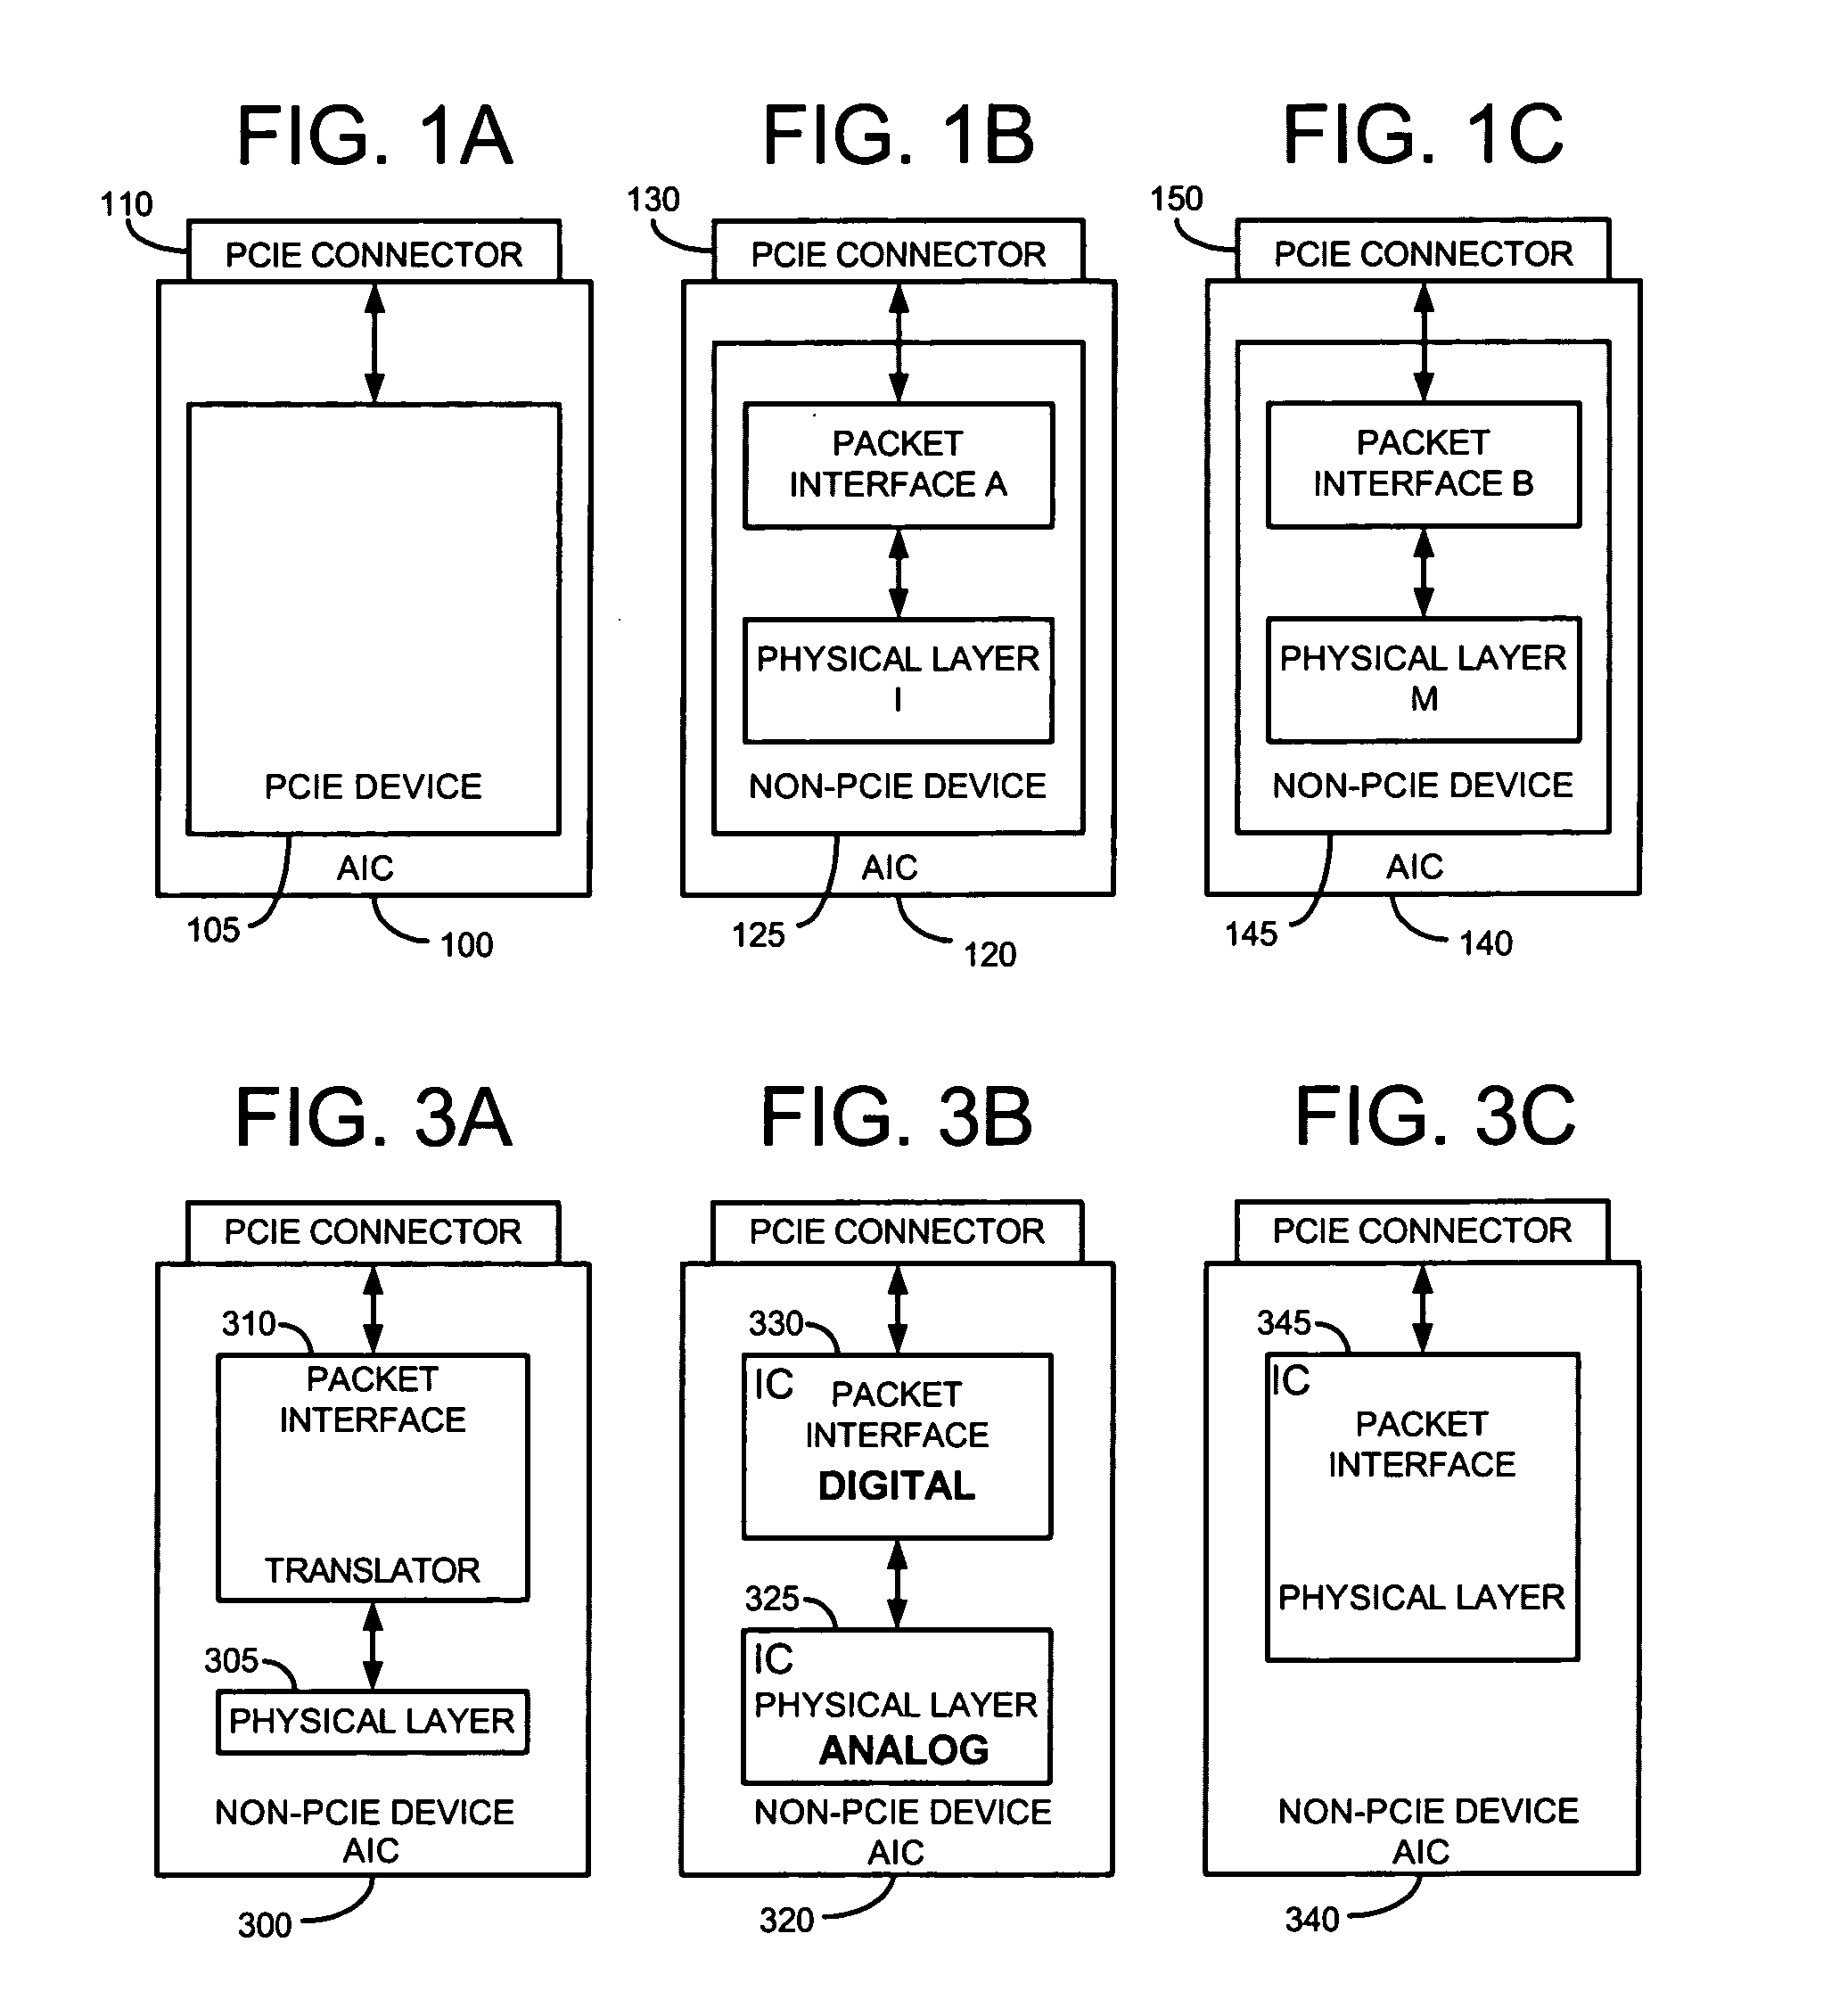 Information handling system capable of operating with multiple types of expansion cards in a common industry standard connector